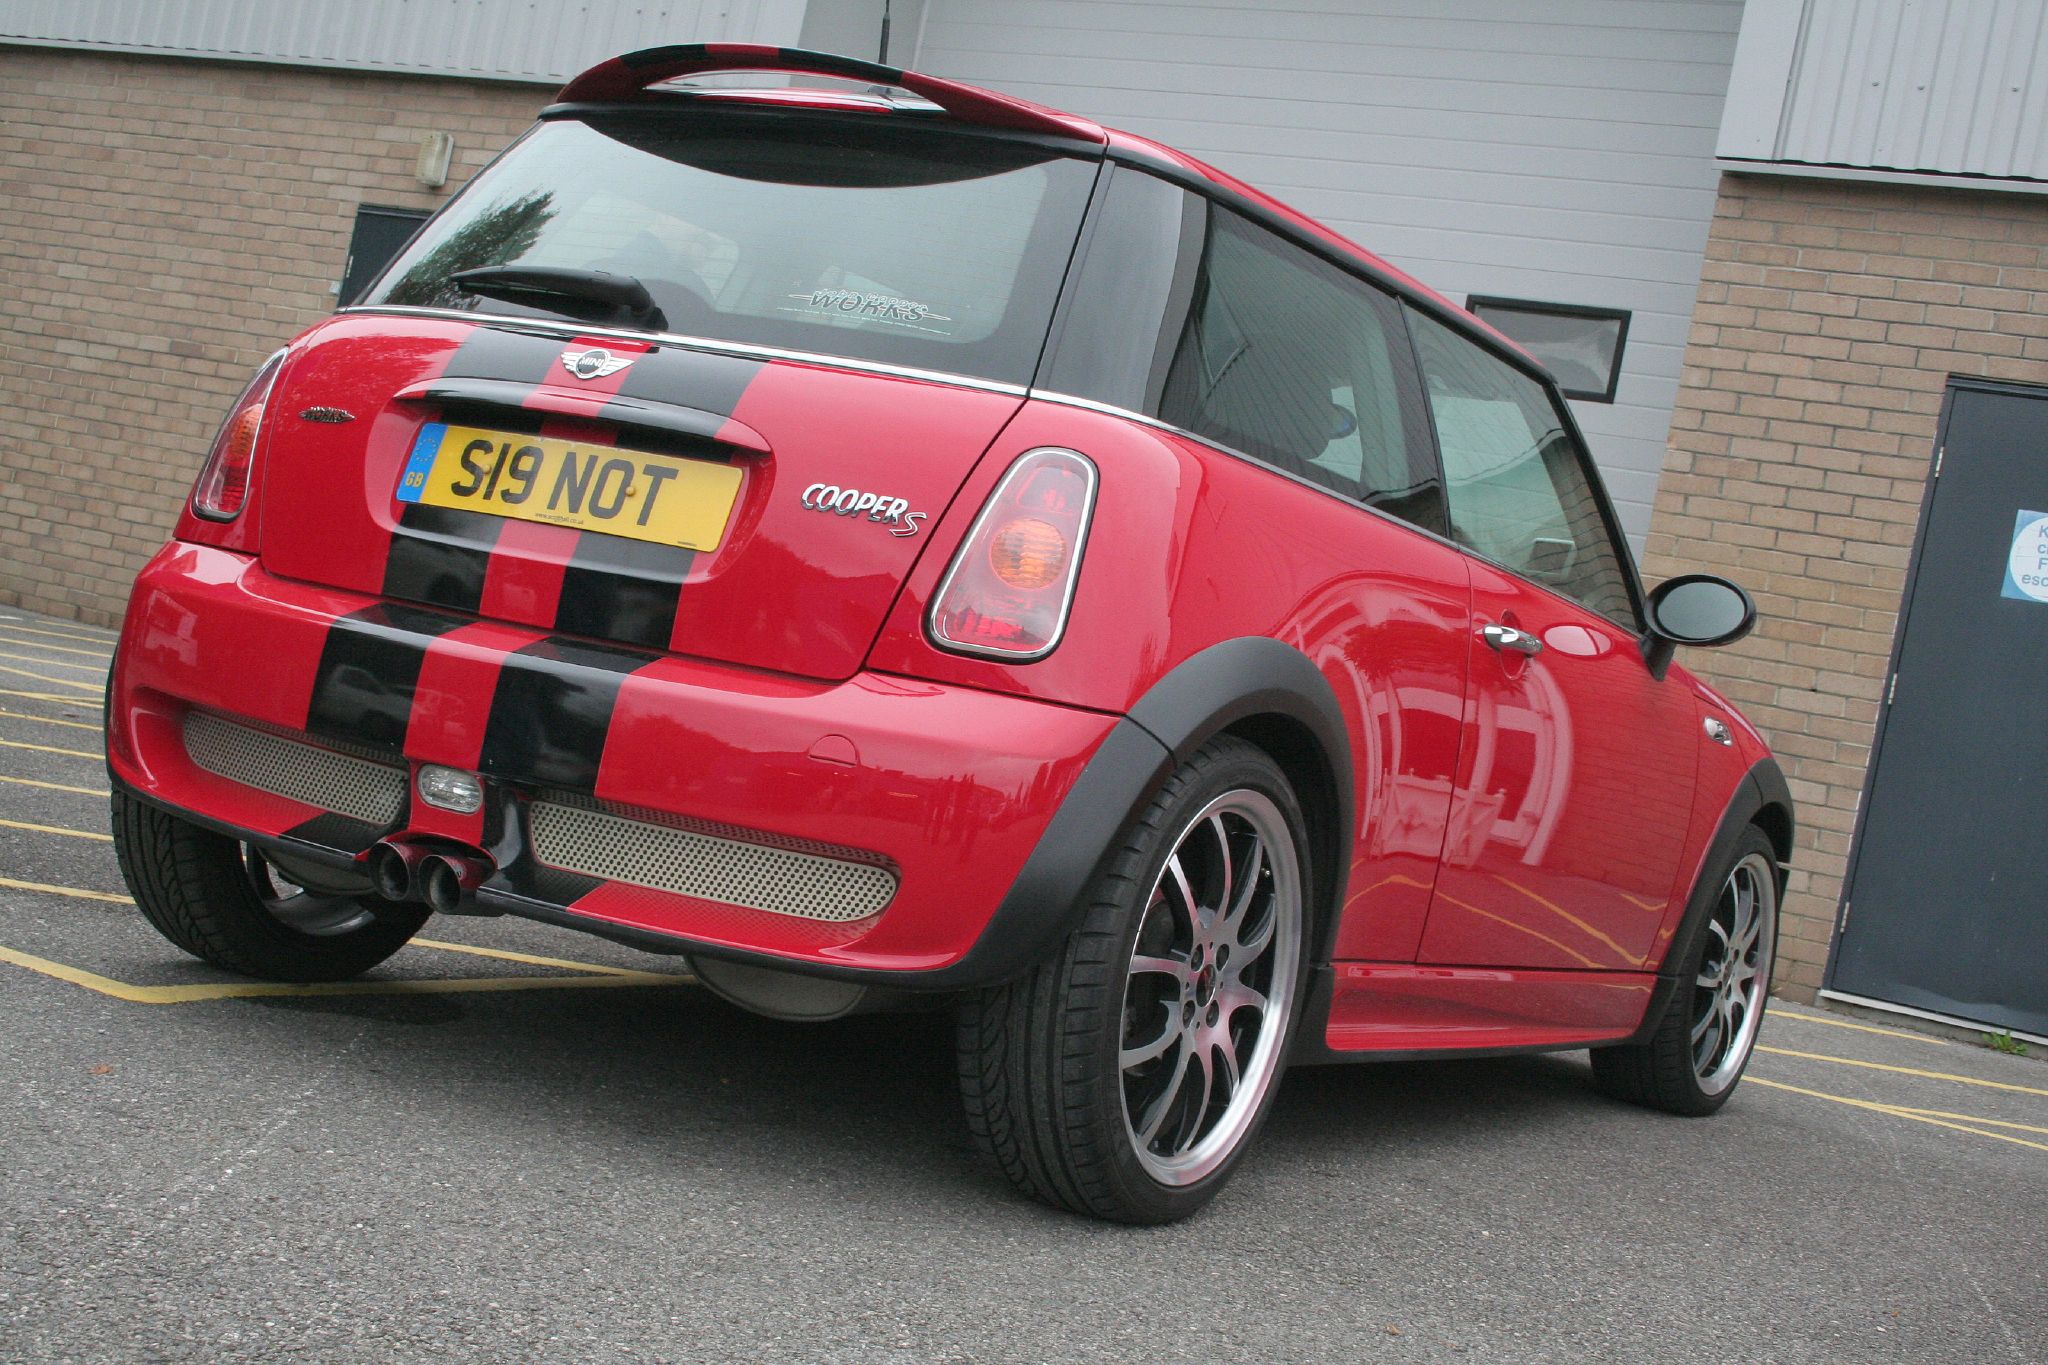 BMW Mini Cooper S works | Flickr - Photo Sharing!